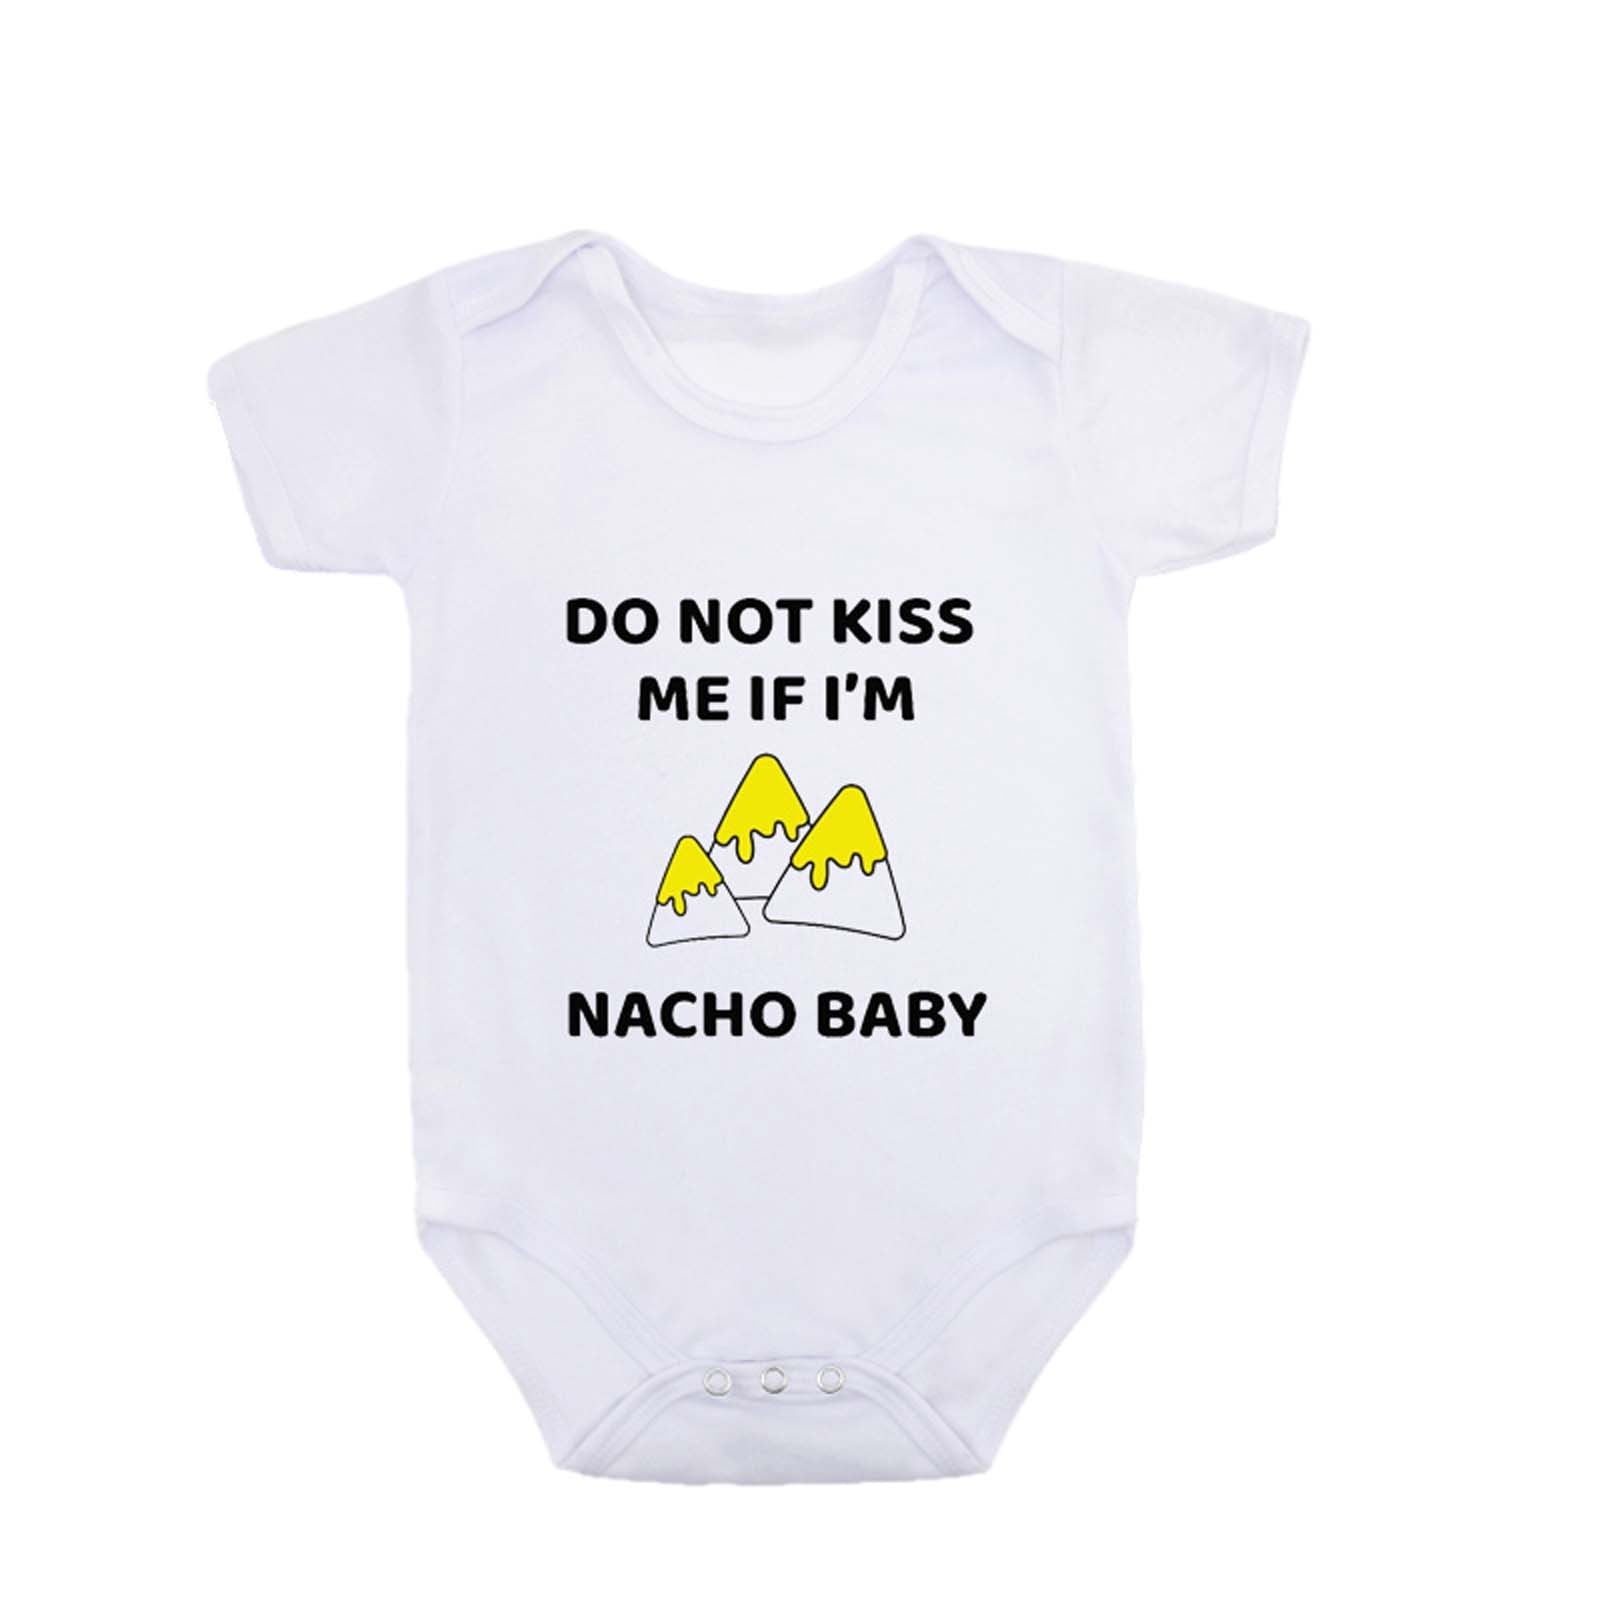 DEELIN Baby Clothes Boys,Unisex Romper Soft Jumpsuit Baby Letter Print Bodysuit Baby Boys Toddler Kids Outfits Button Newborn Baby Boys Clothes 